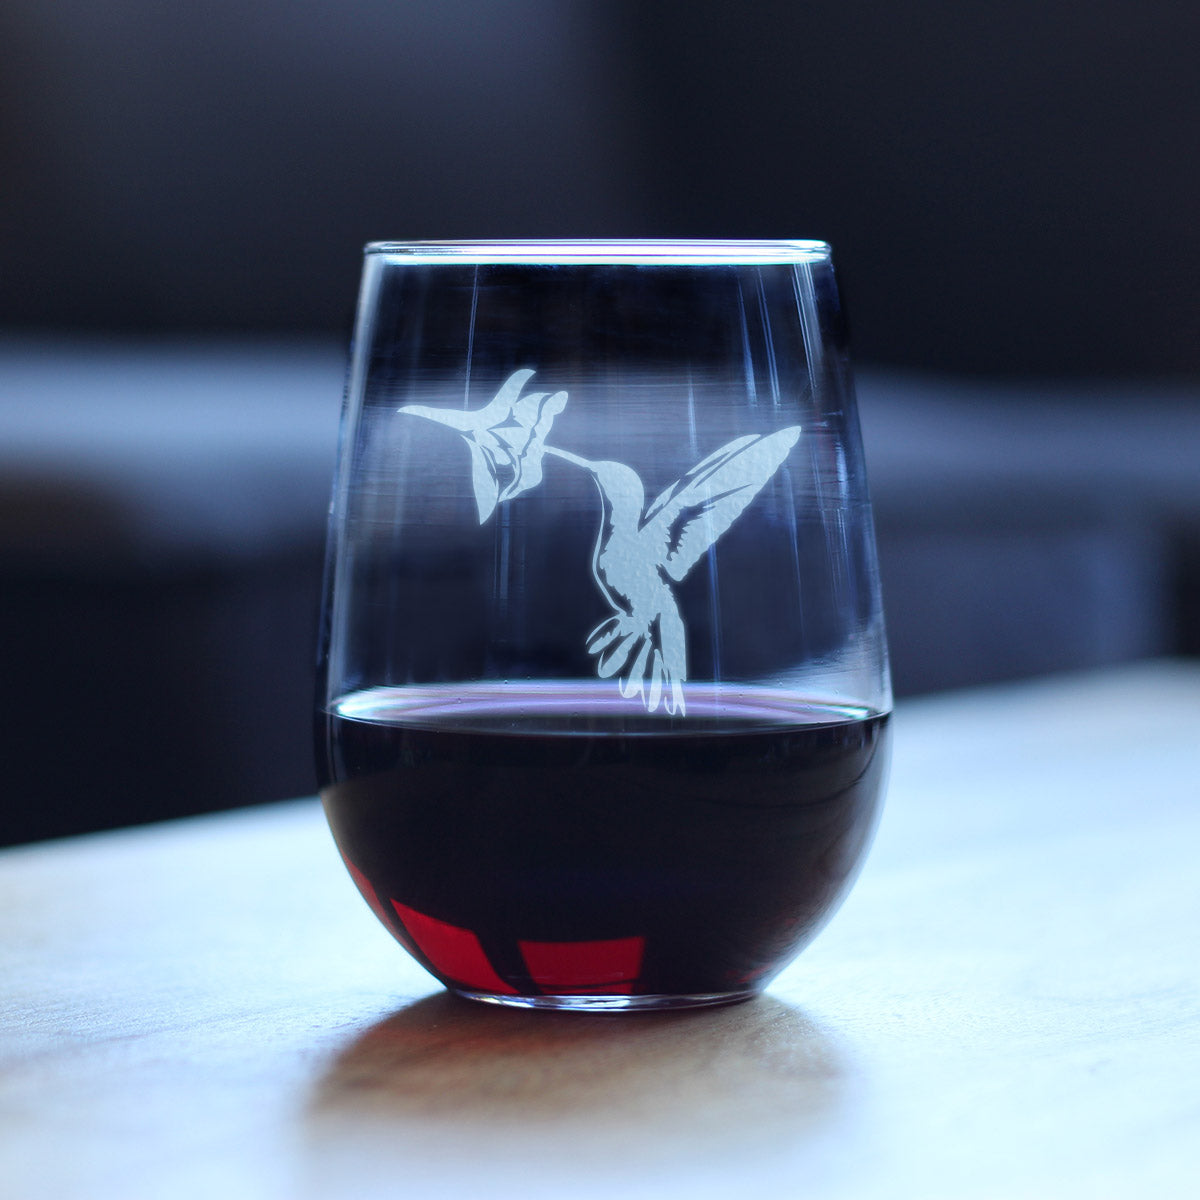 Hummingbird - Stemless Wine Glass - Bird Themed Gifts and Decor for Men &amp; Women - Large 17 oz Glasses